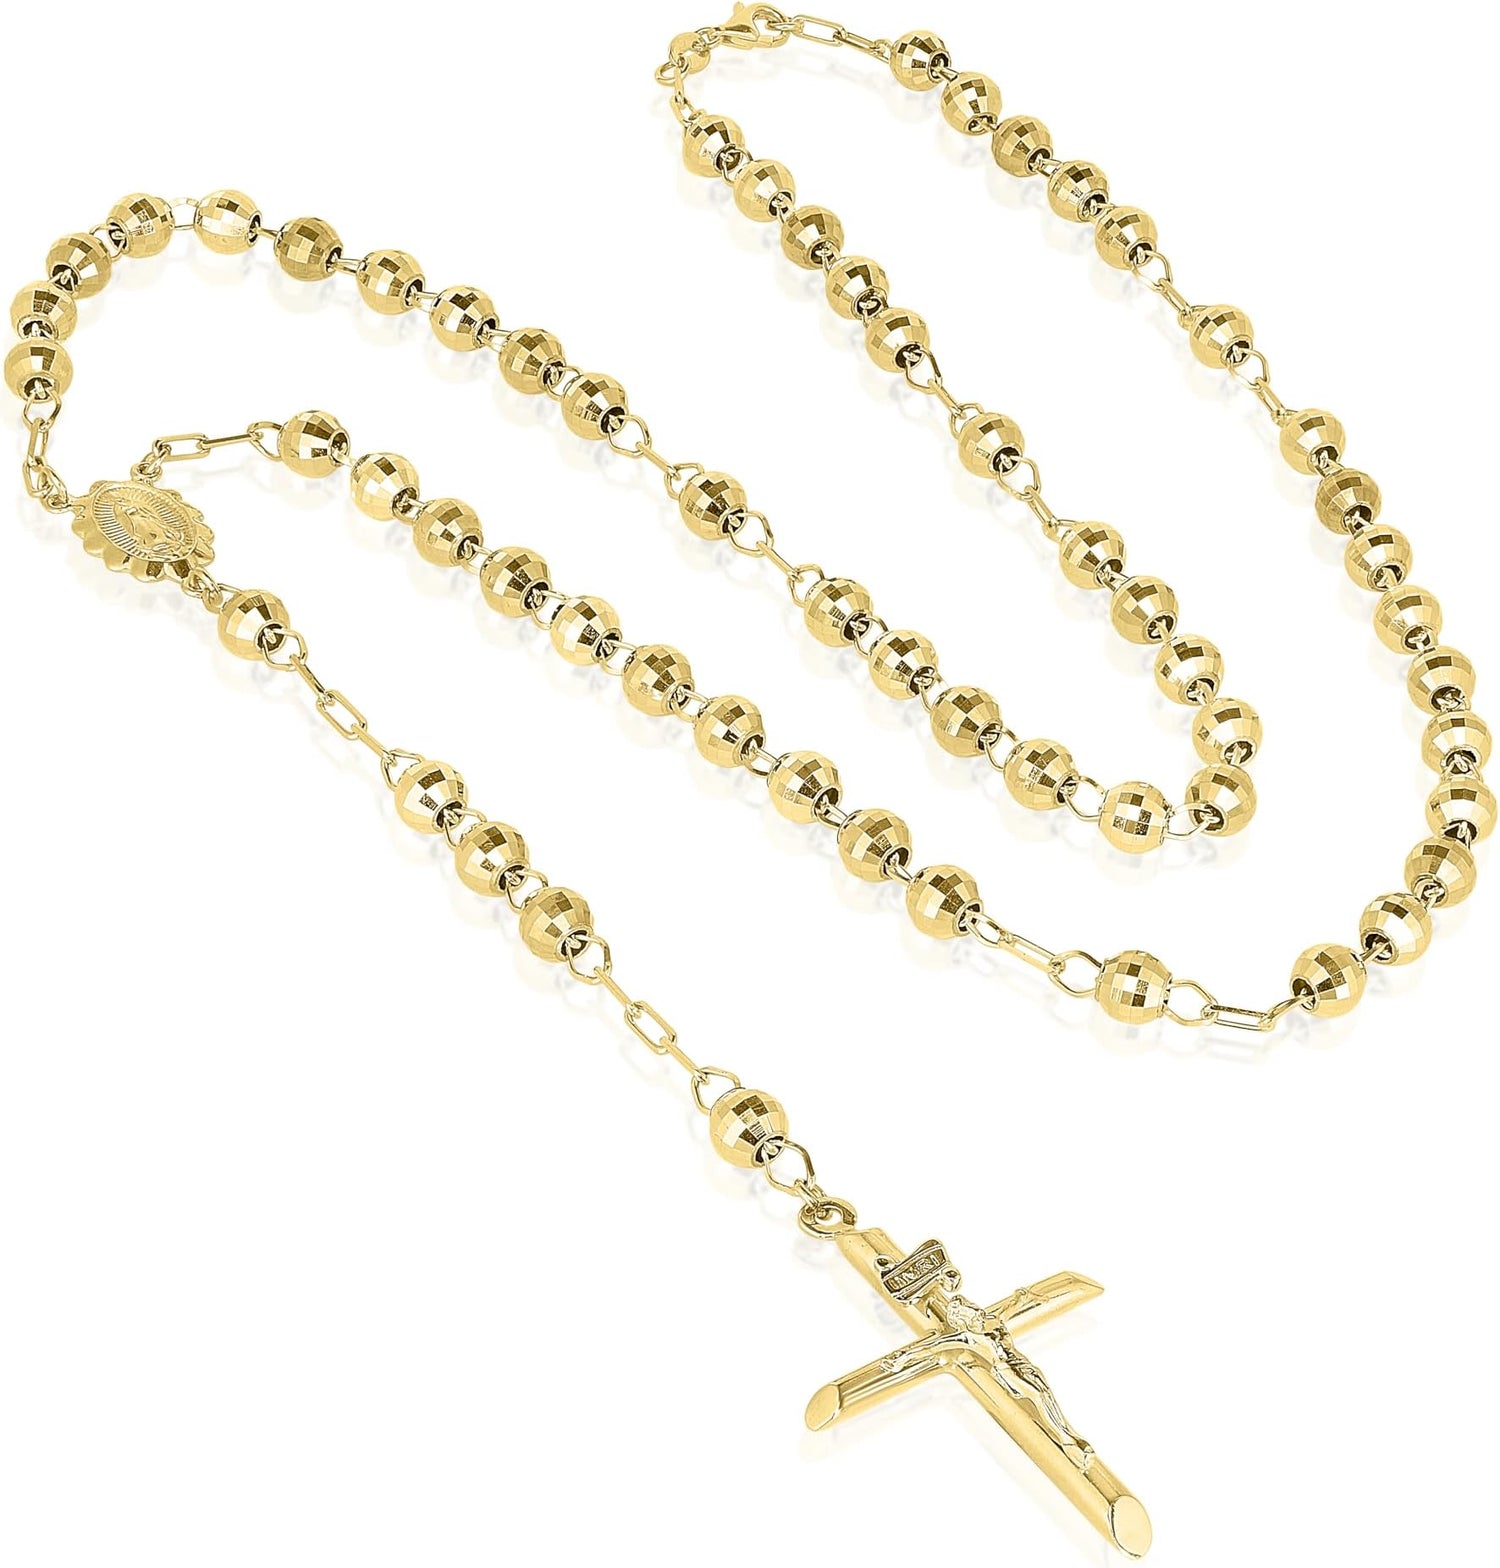 10k Yellow Gold or Tri Color 5mm Rosary with Virgin Mary Medal and Crucifix of Jesus Cross Pendant Chain Necklace